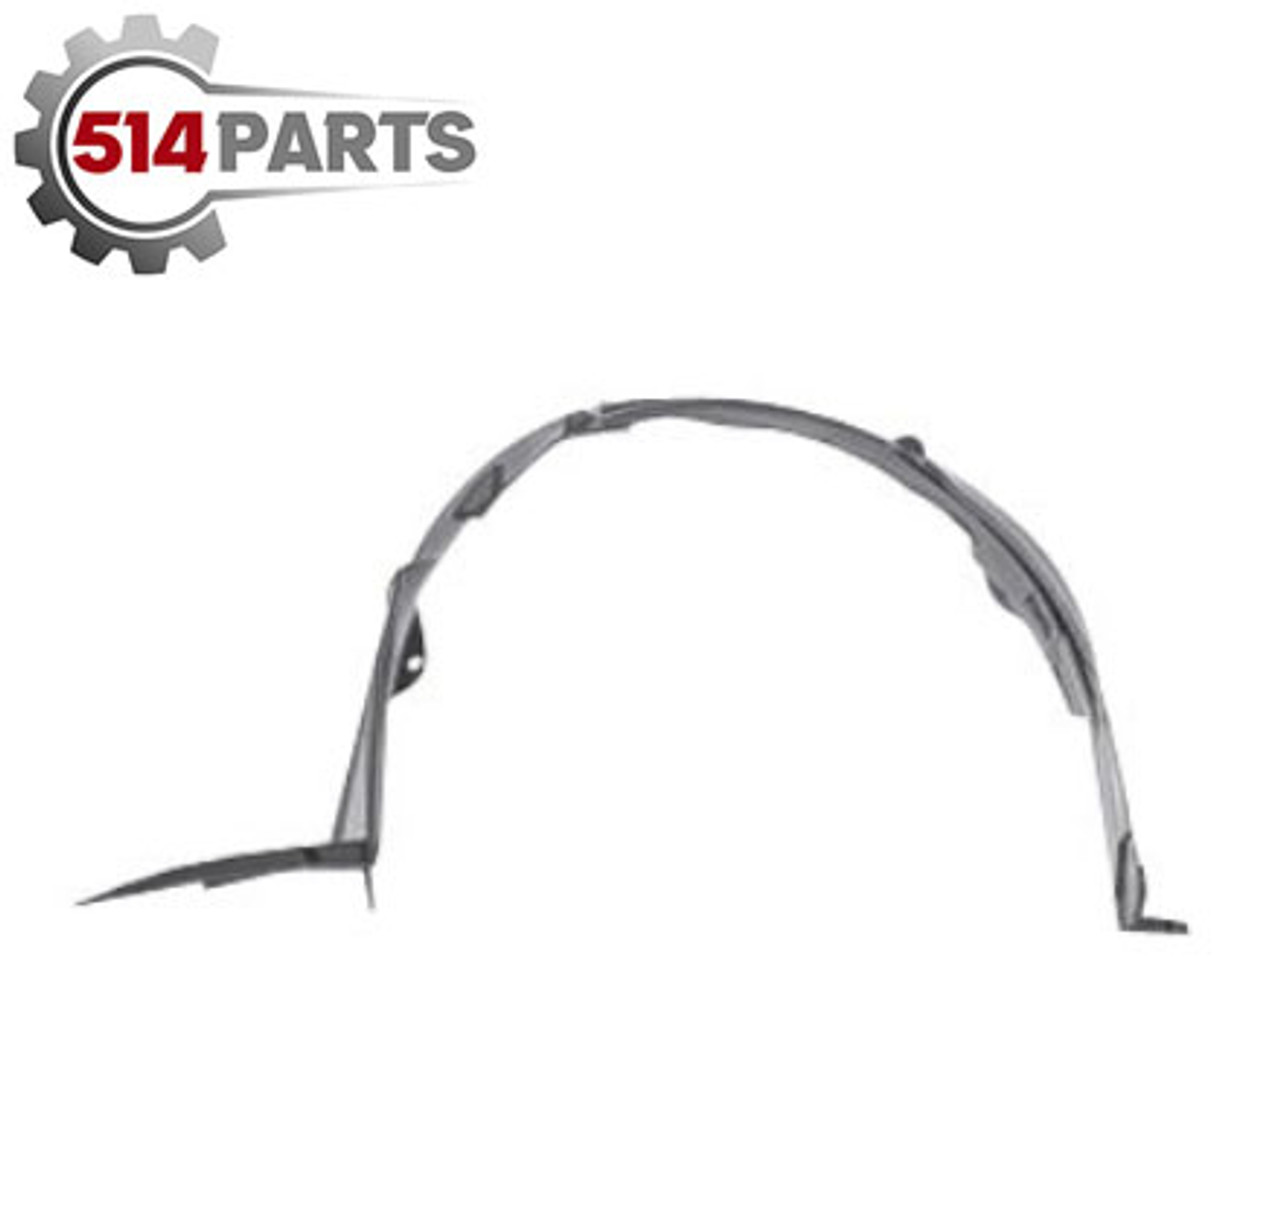 2004 - 2008 NISSAN MAXIMA FENDER LINER - FAUSSE AILE